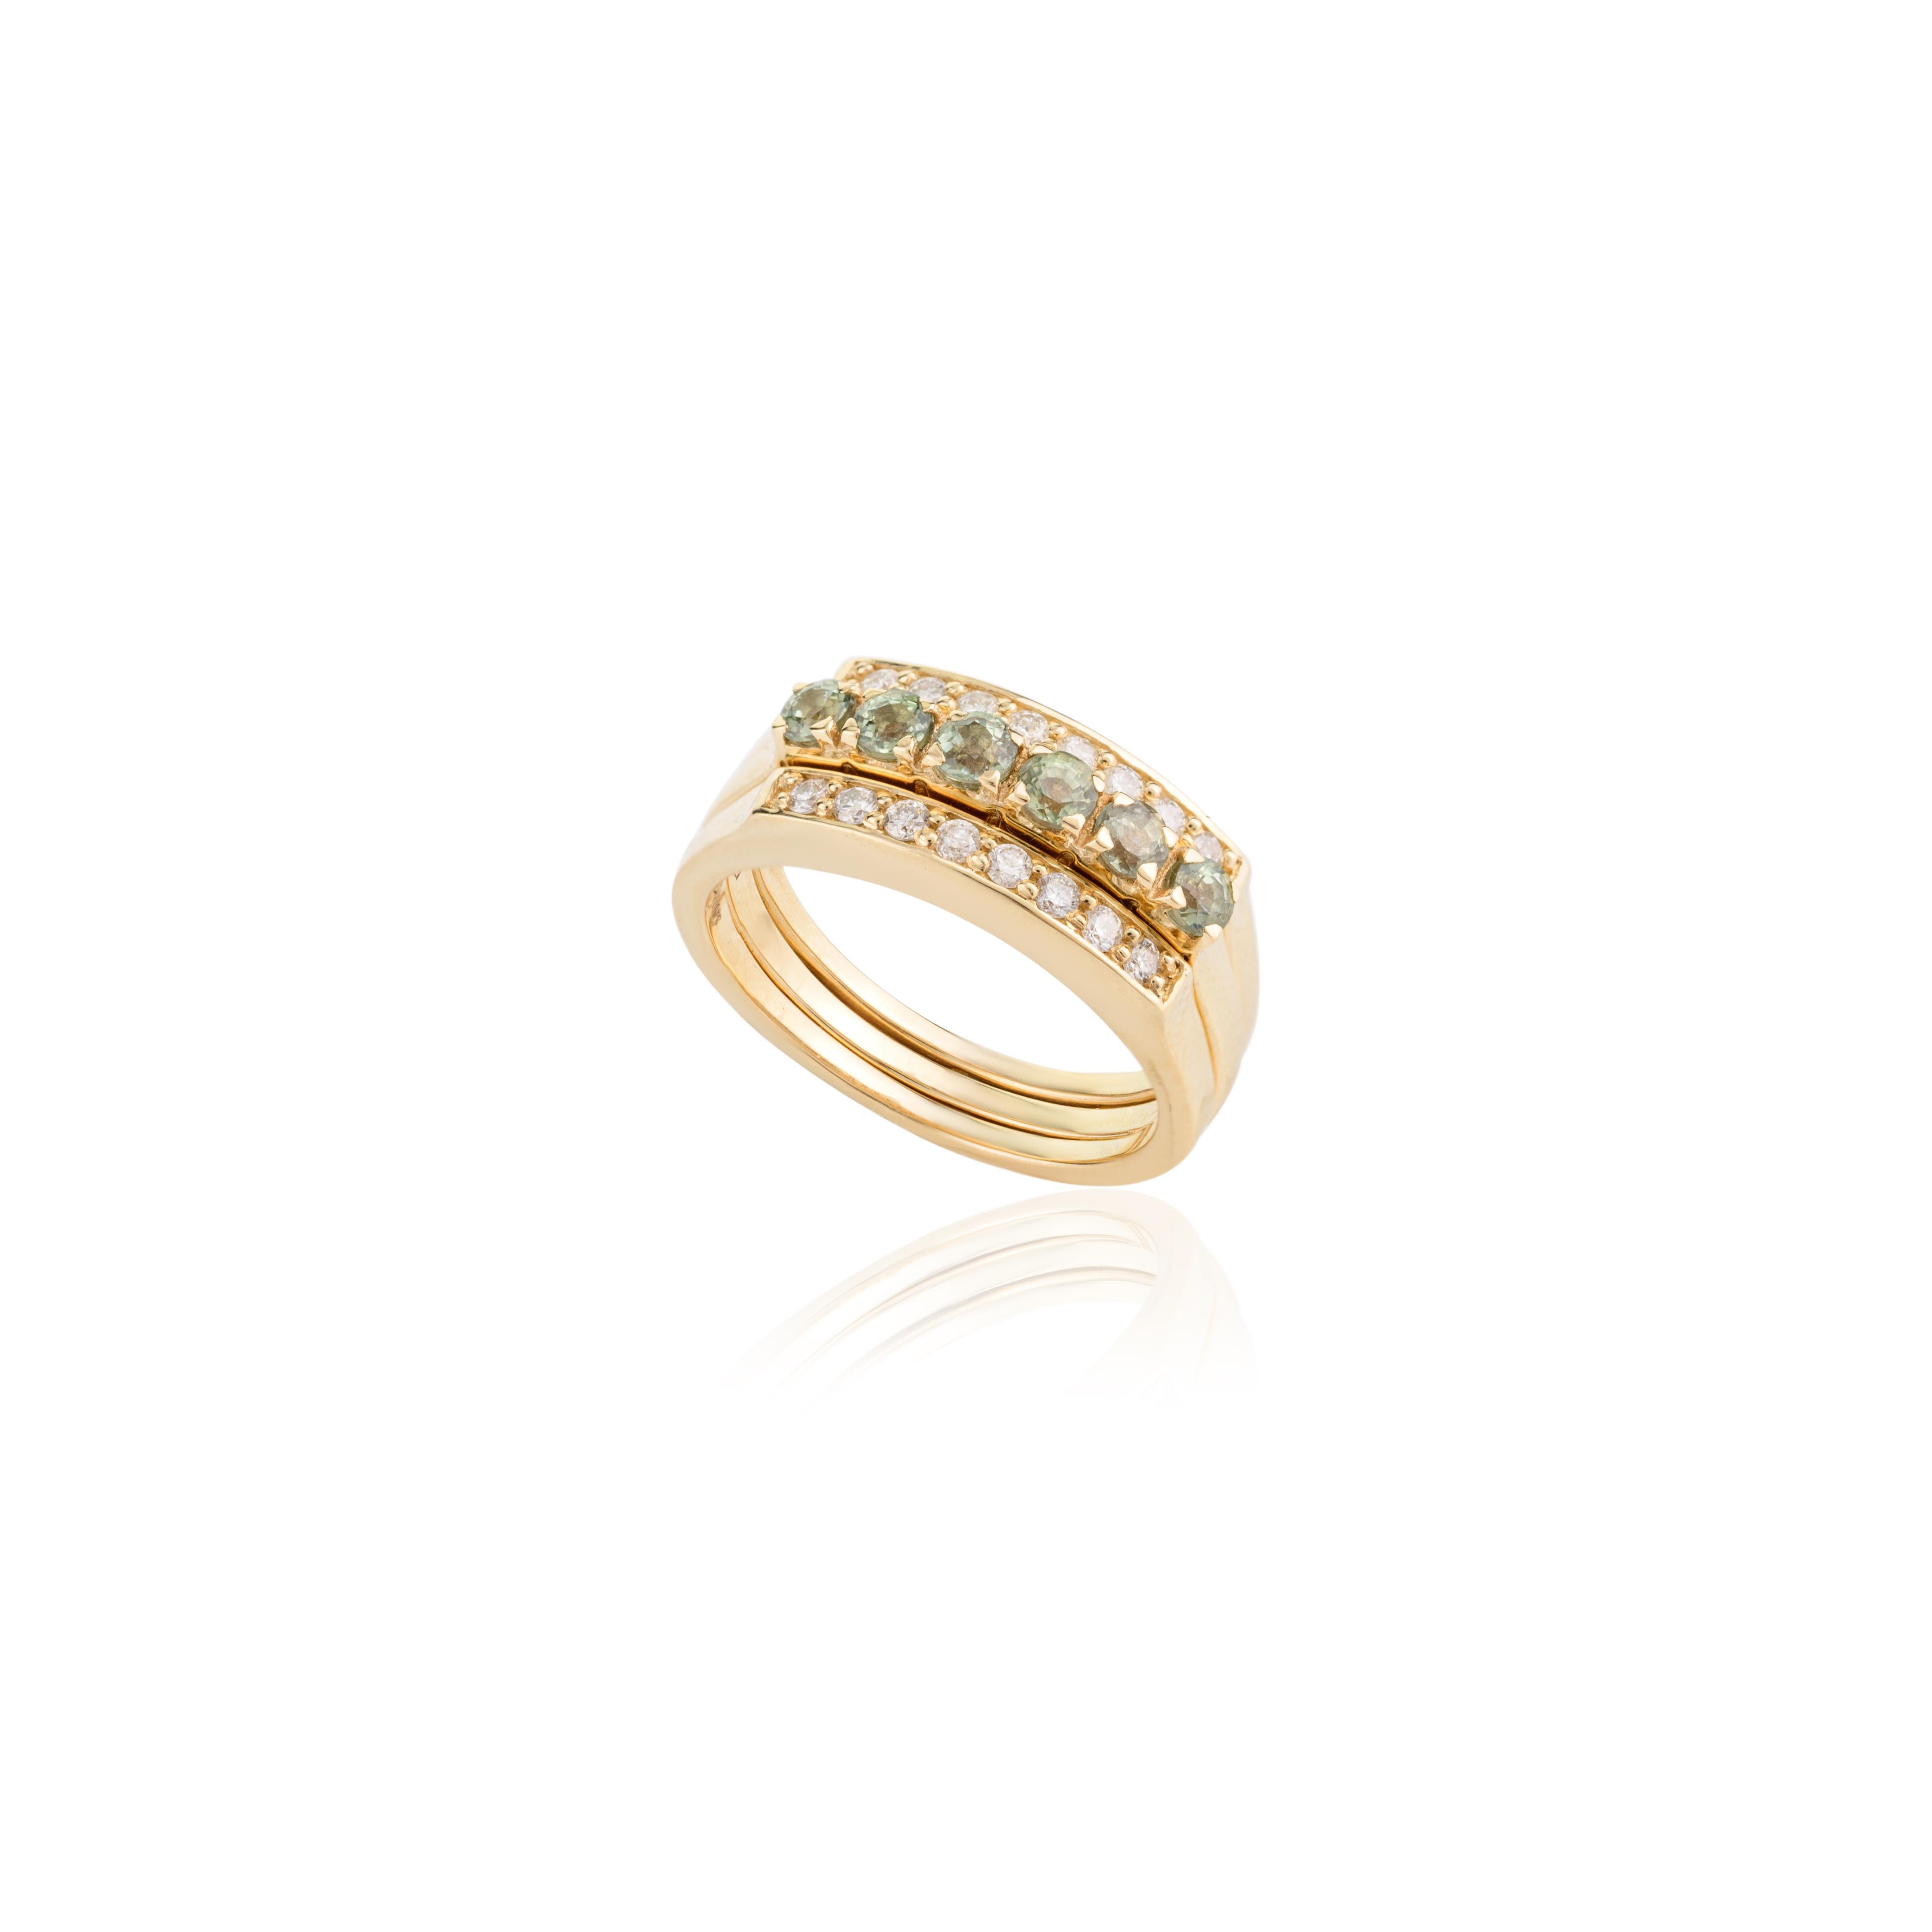 For Sale:  Unique Two-in-One Green Sapphire and Diamond Wedding Ring 14k Solid Yellow Gold 10